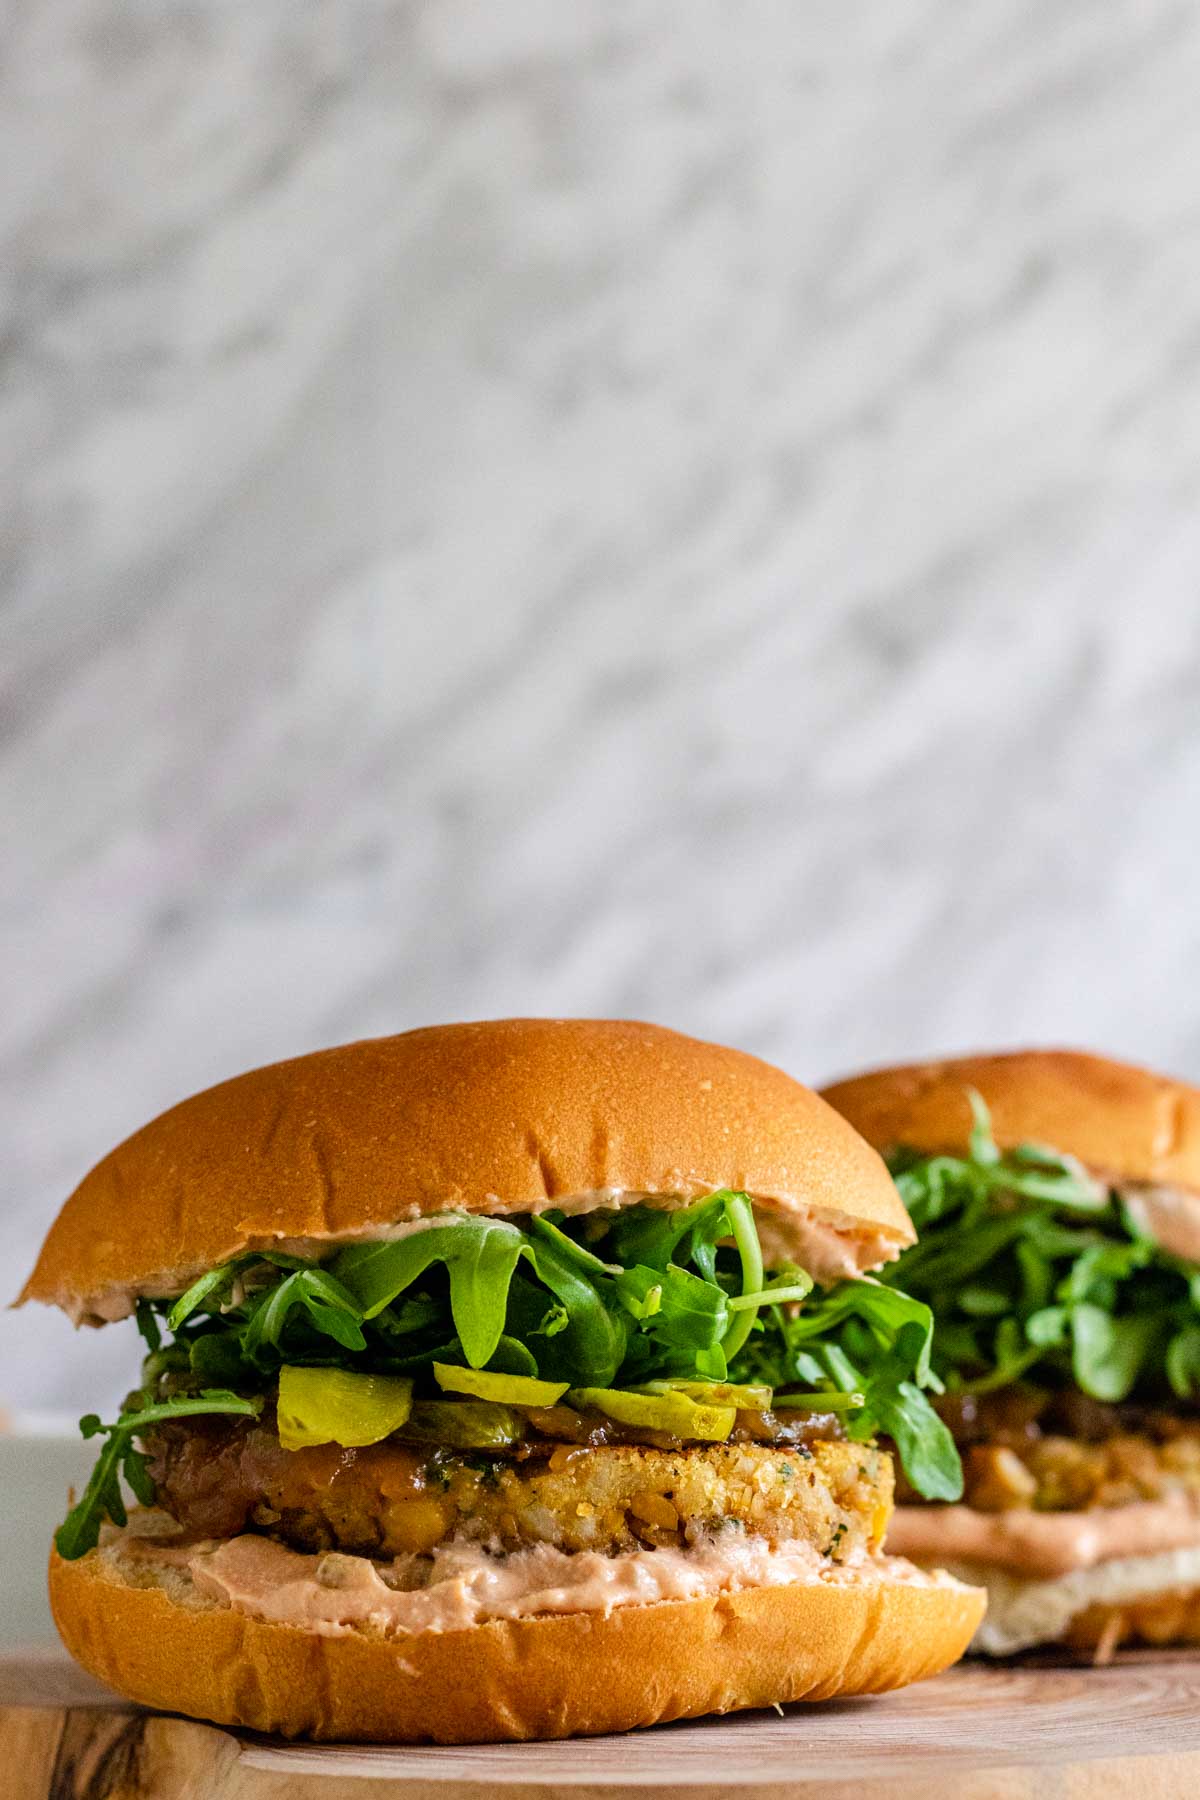 Chickpea burgers on buns with sauce, pickles, and arugula.